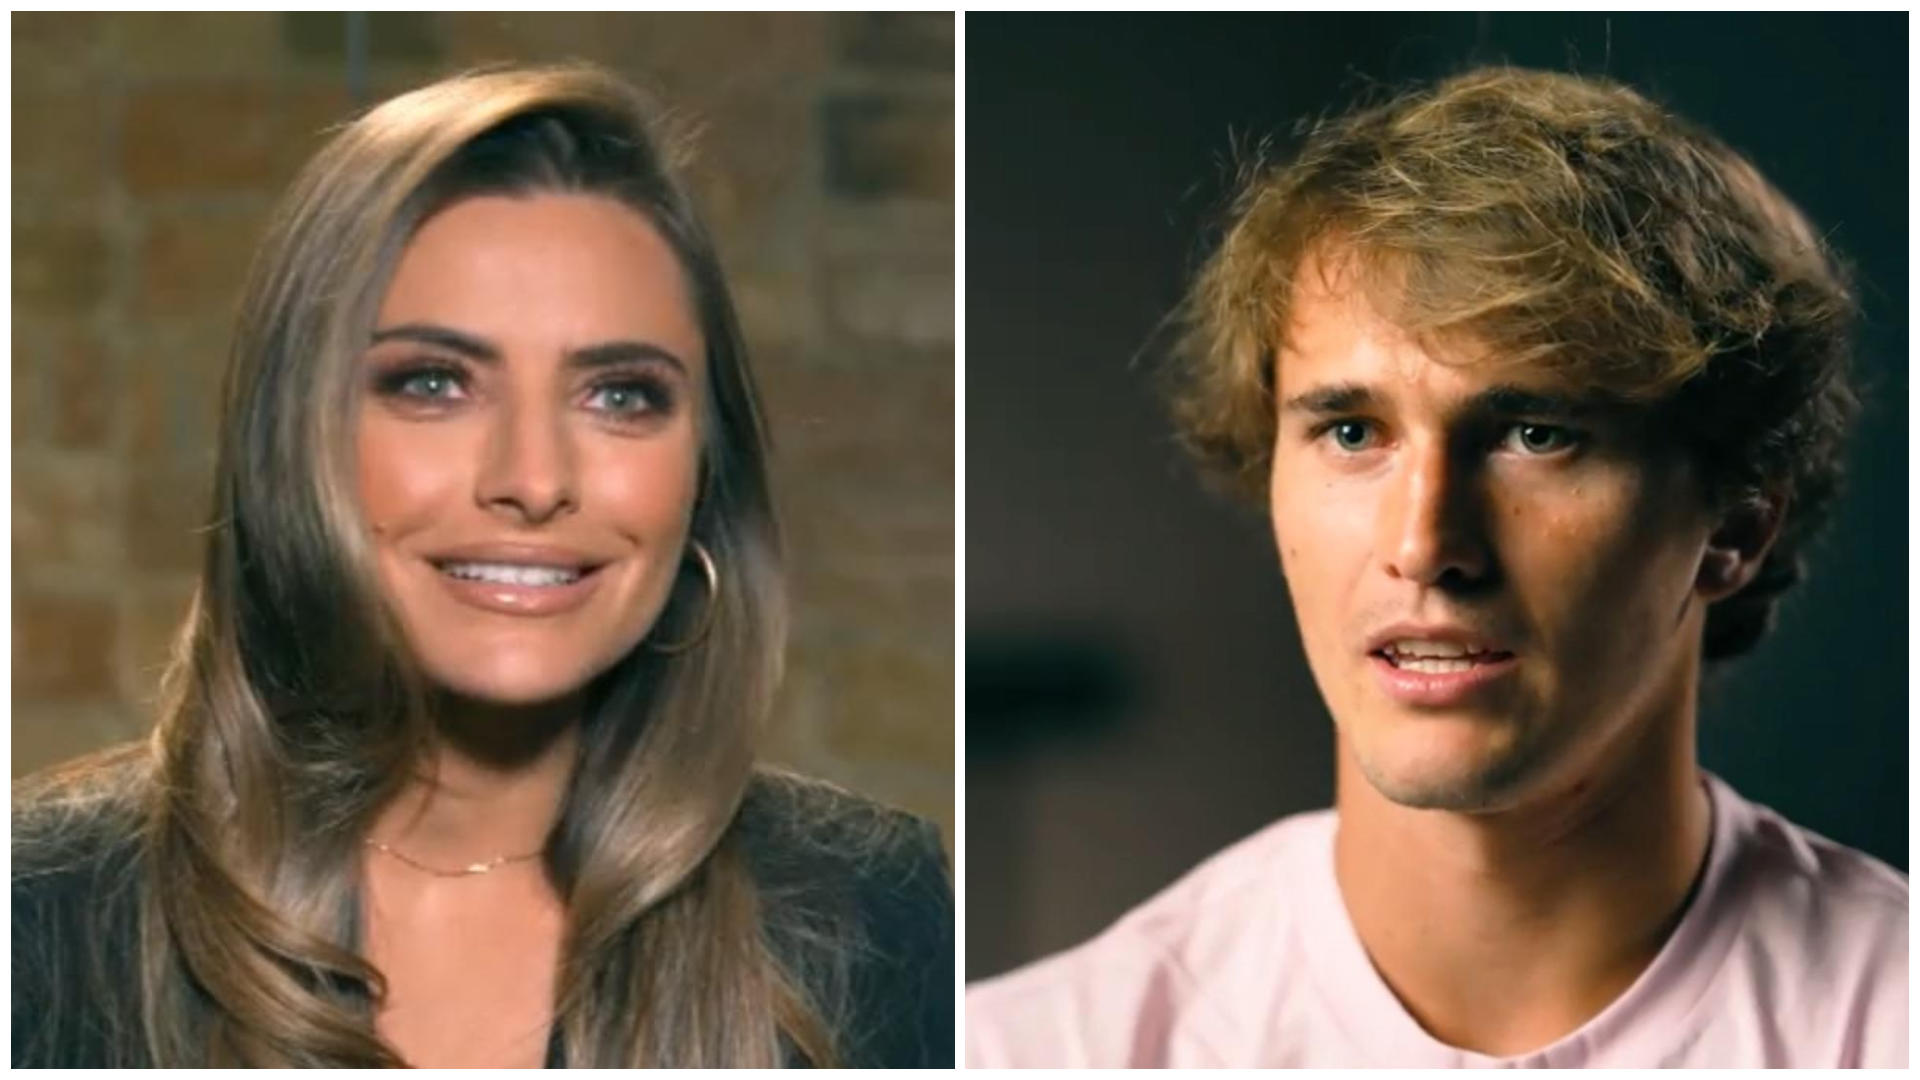 Getting to know Sophia Thomalla and Alexander Zverev "It